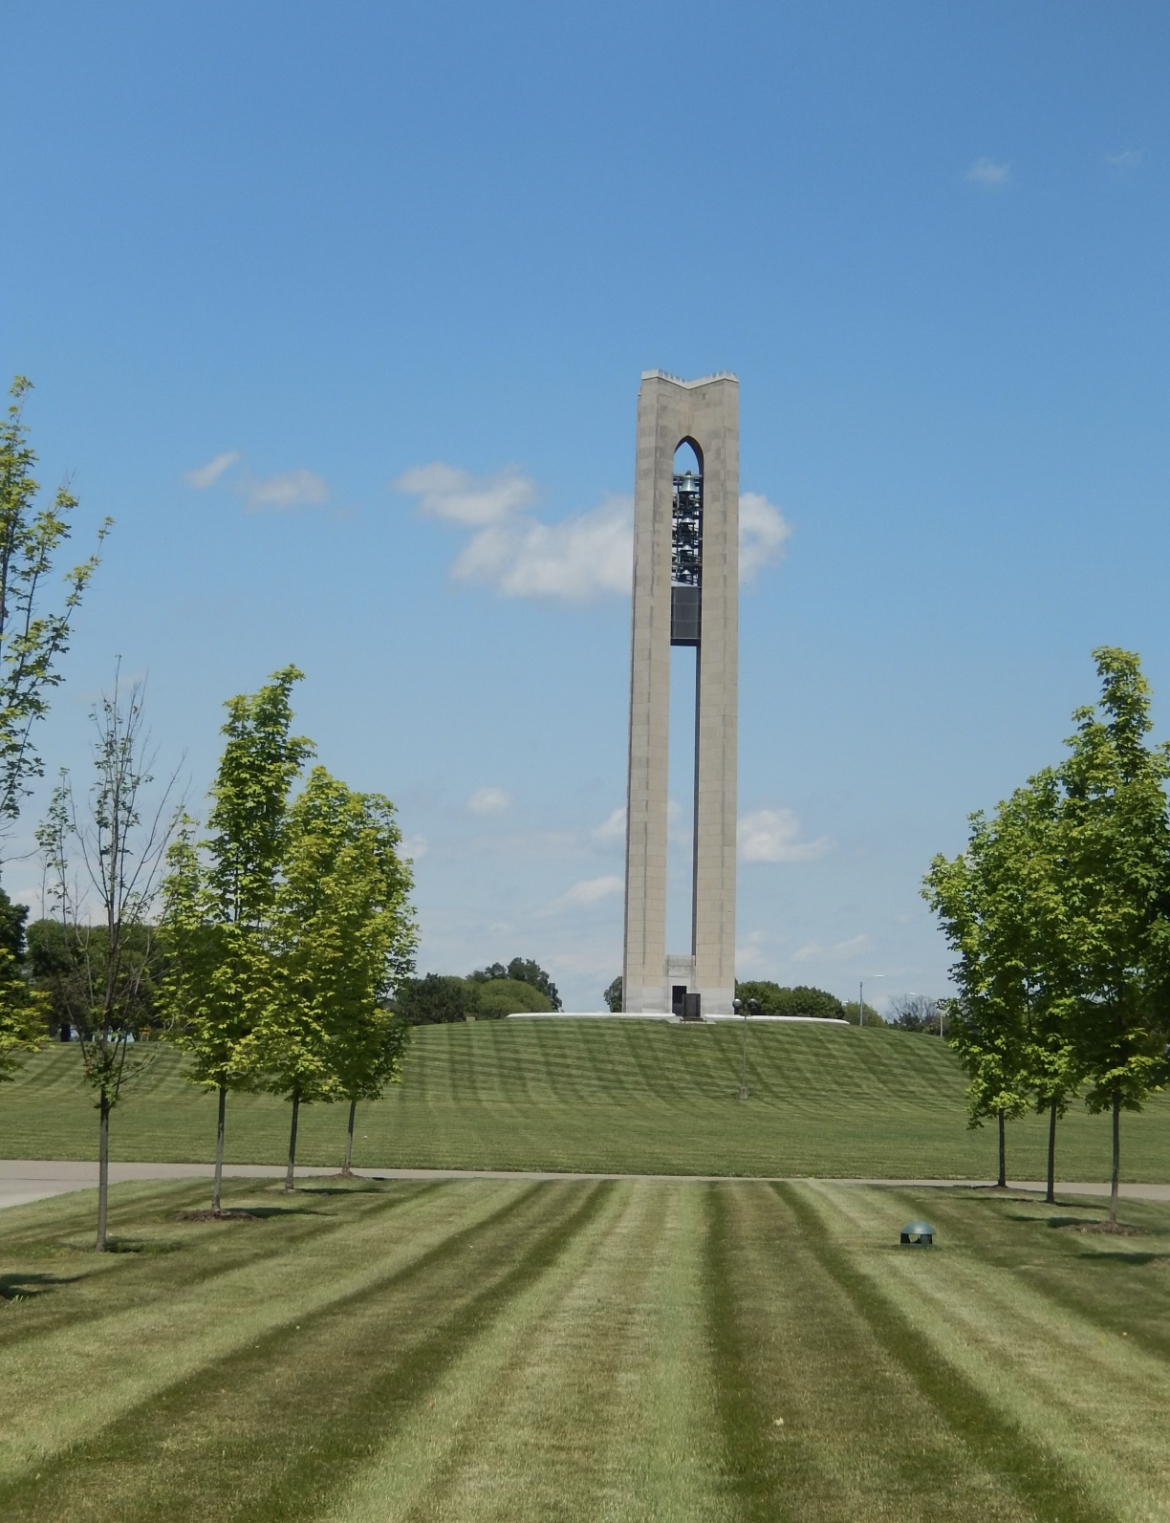 This is the Deeds Carillon, it has 57 bells and is used for musical concerts for the public!